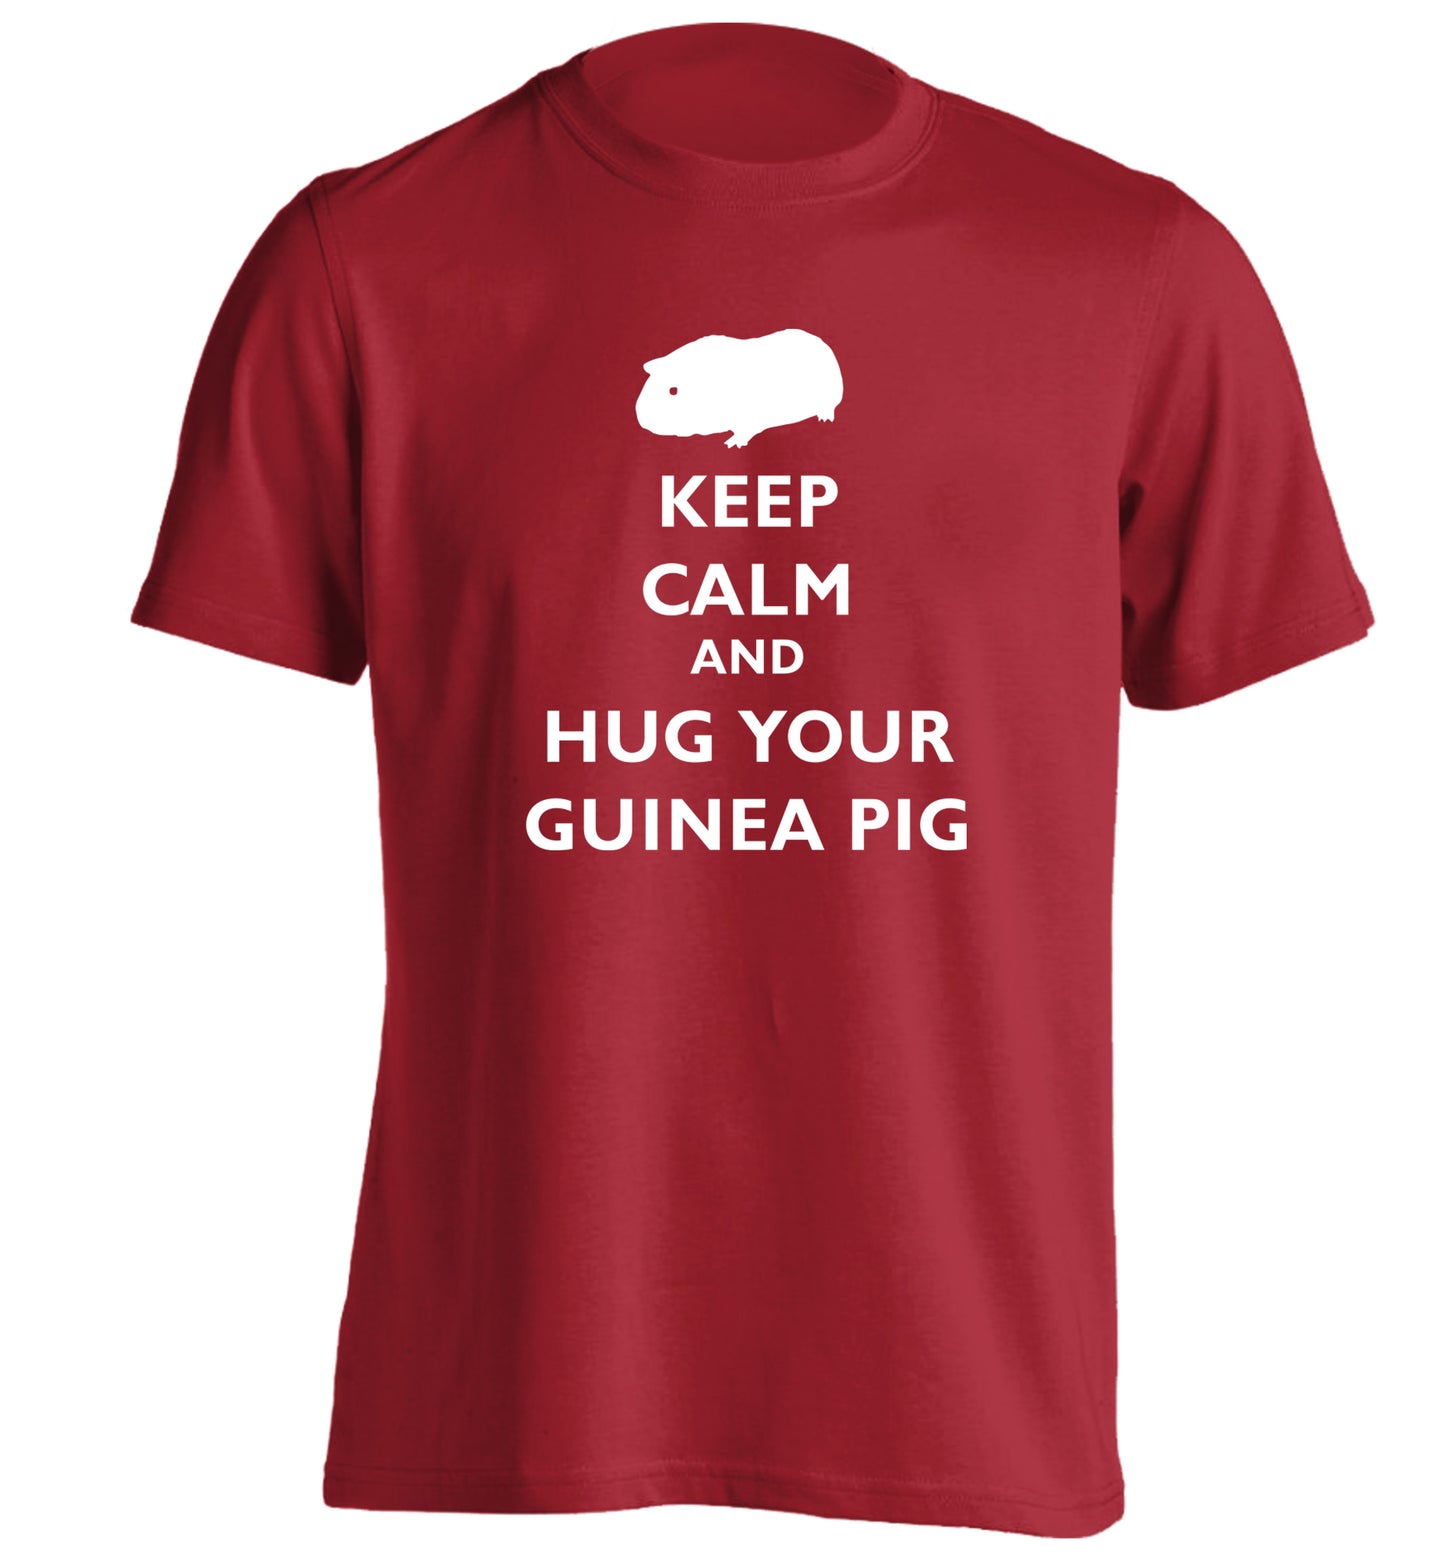 Keep calm and hug your guineapig adults unisex red Tshirt 2XL